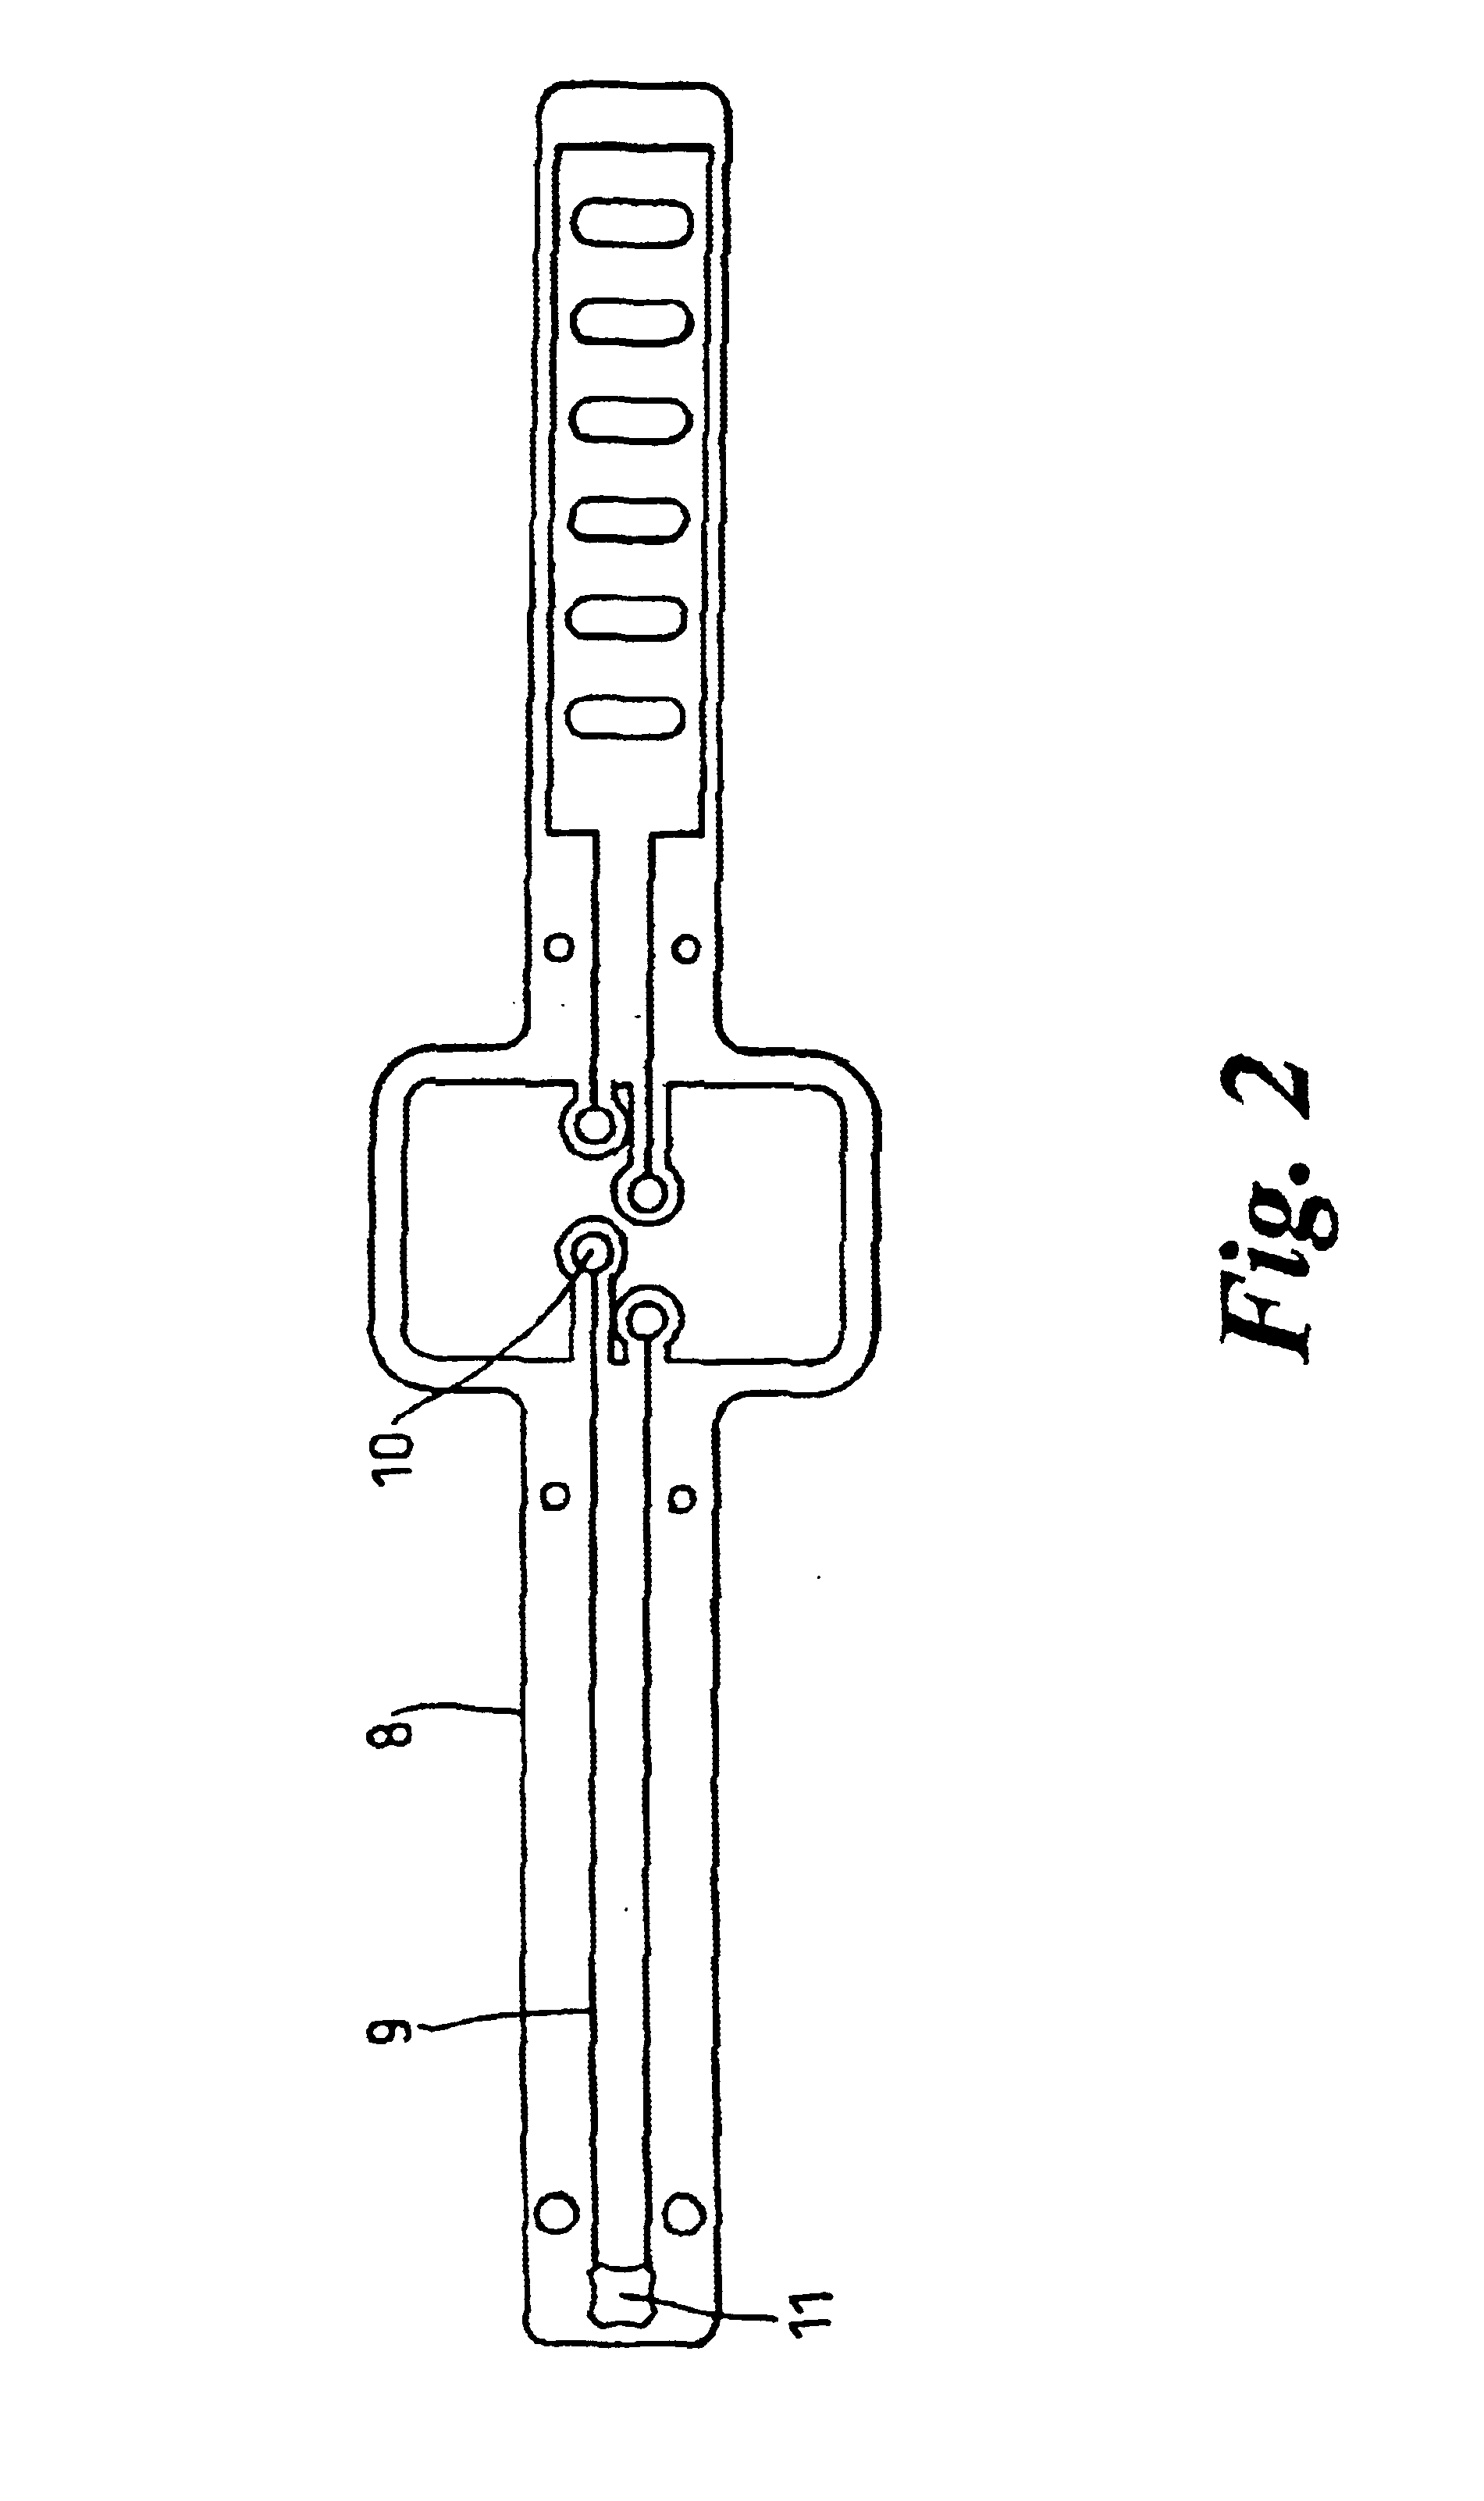 Tagging device